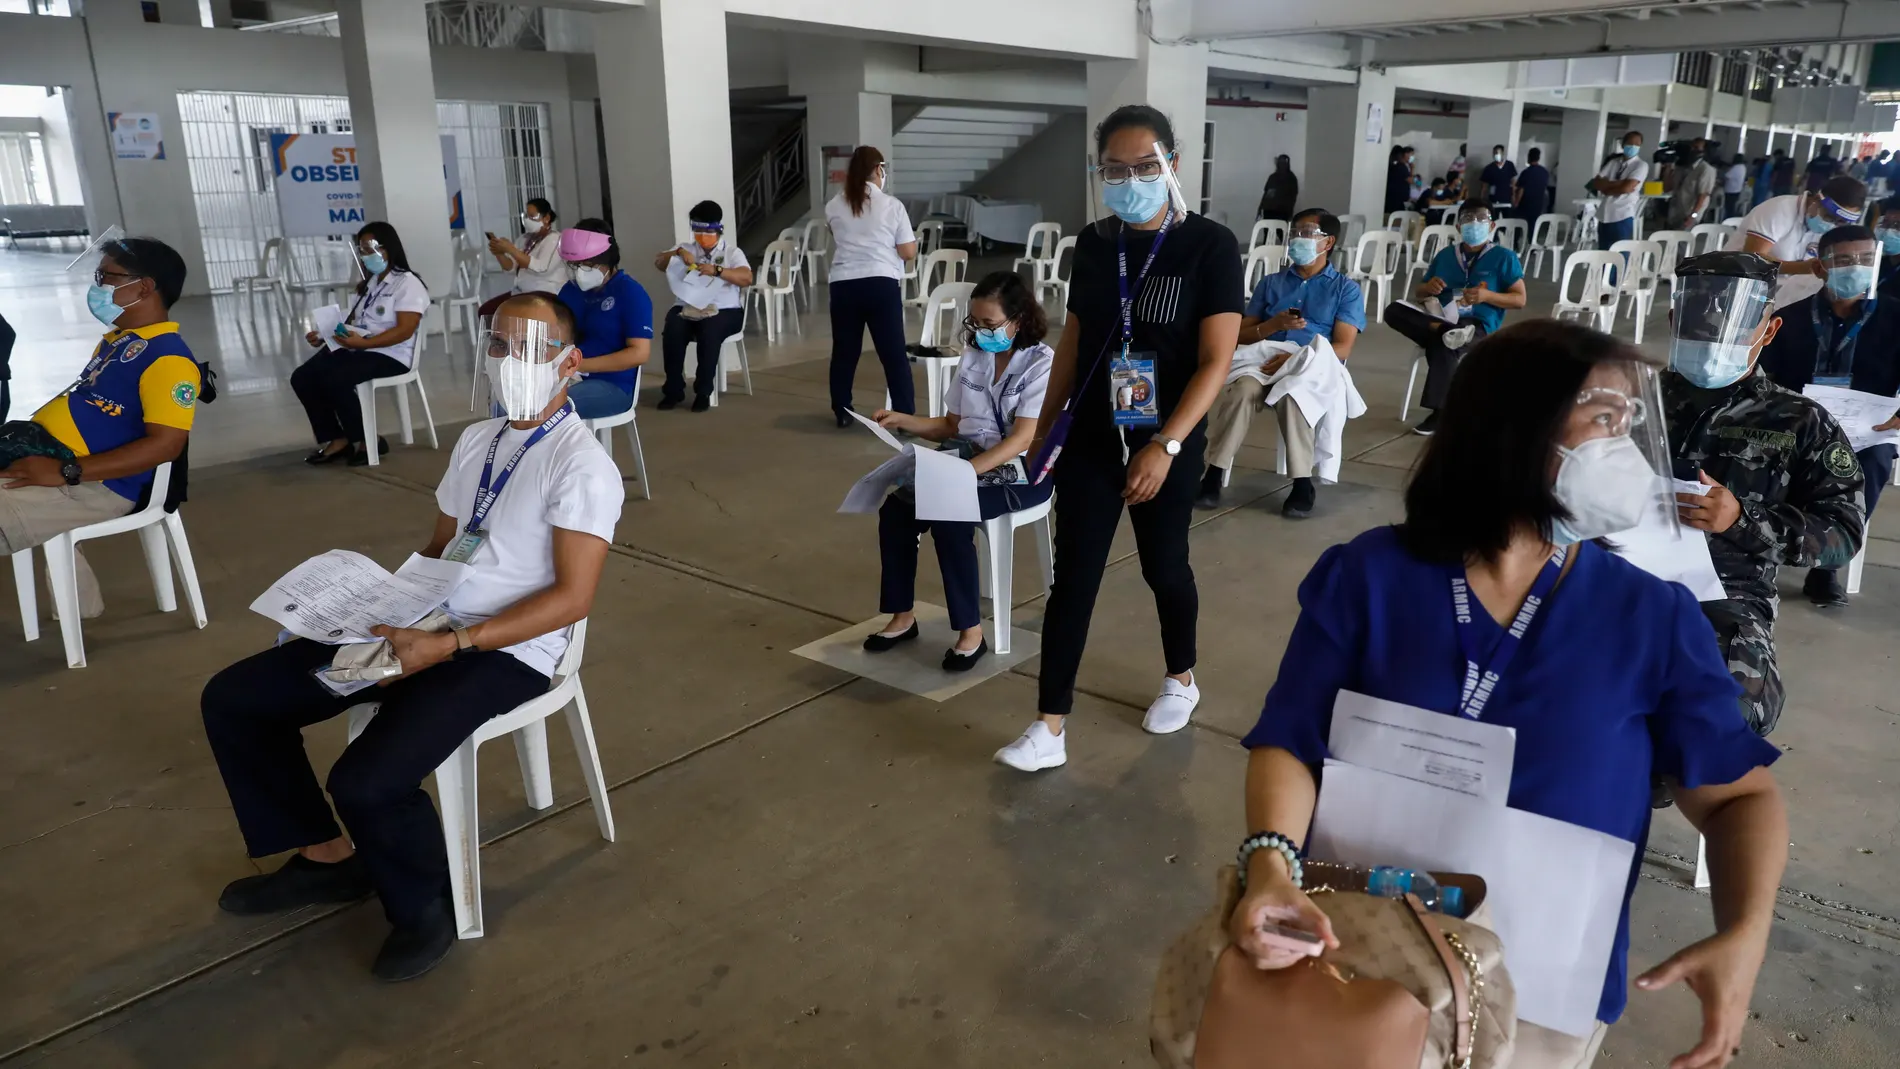 Manila (Philippines), 02/03/2021.- Hospital workers who received their doses of Sinovac COVID-19 vaccine take seats in an observation area used to check for possible side effects, at a sports complex in Marikina City, Metro Manila, Philippines 02 March 2021. The first shipment of Sinovac vaccine from China arrived on 28 February, more than a year after the Philippines announced its first recorded case of the coronavirus in the country. (Filipinas) EFE/EPA/ROLEX DELA PENA